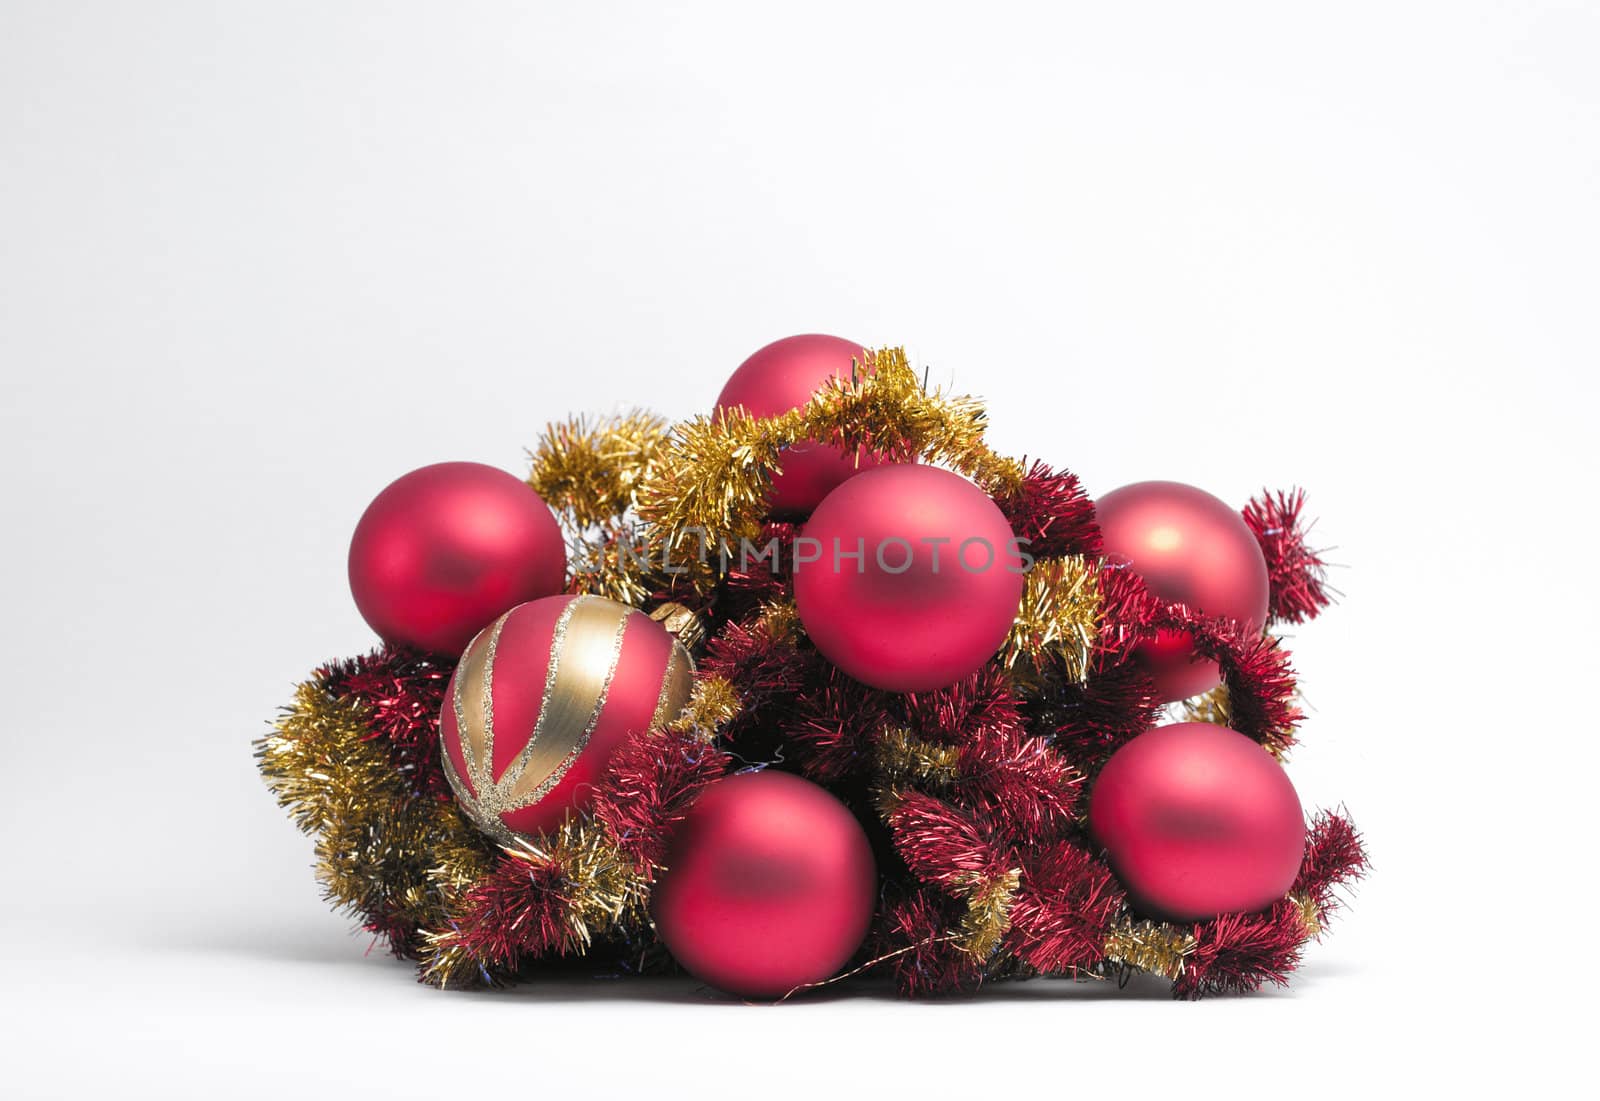 Christmas baubles on red & gold tinsel on a white background